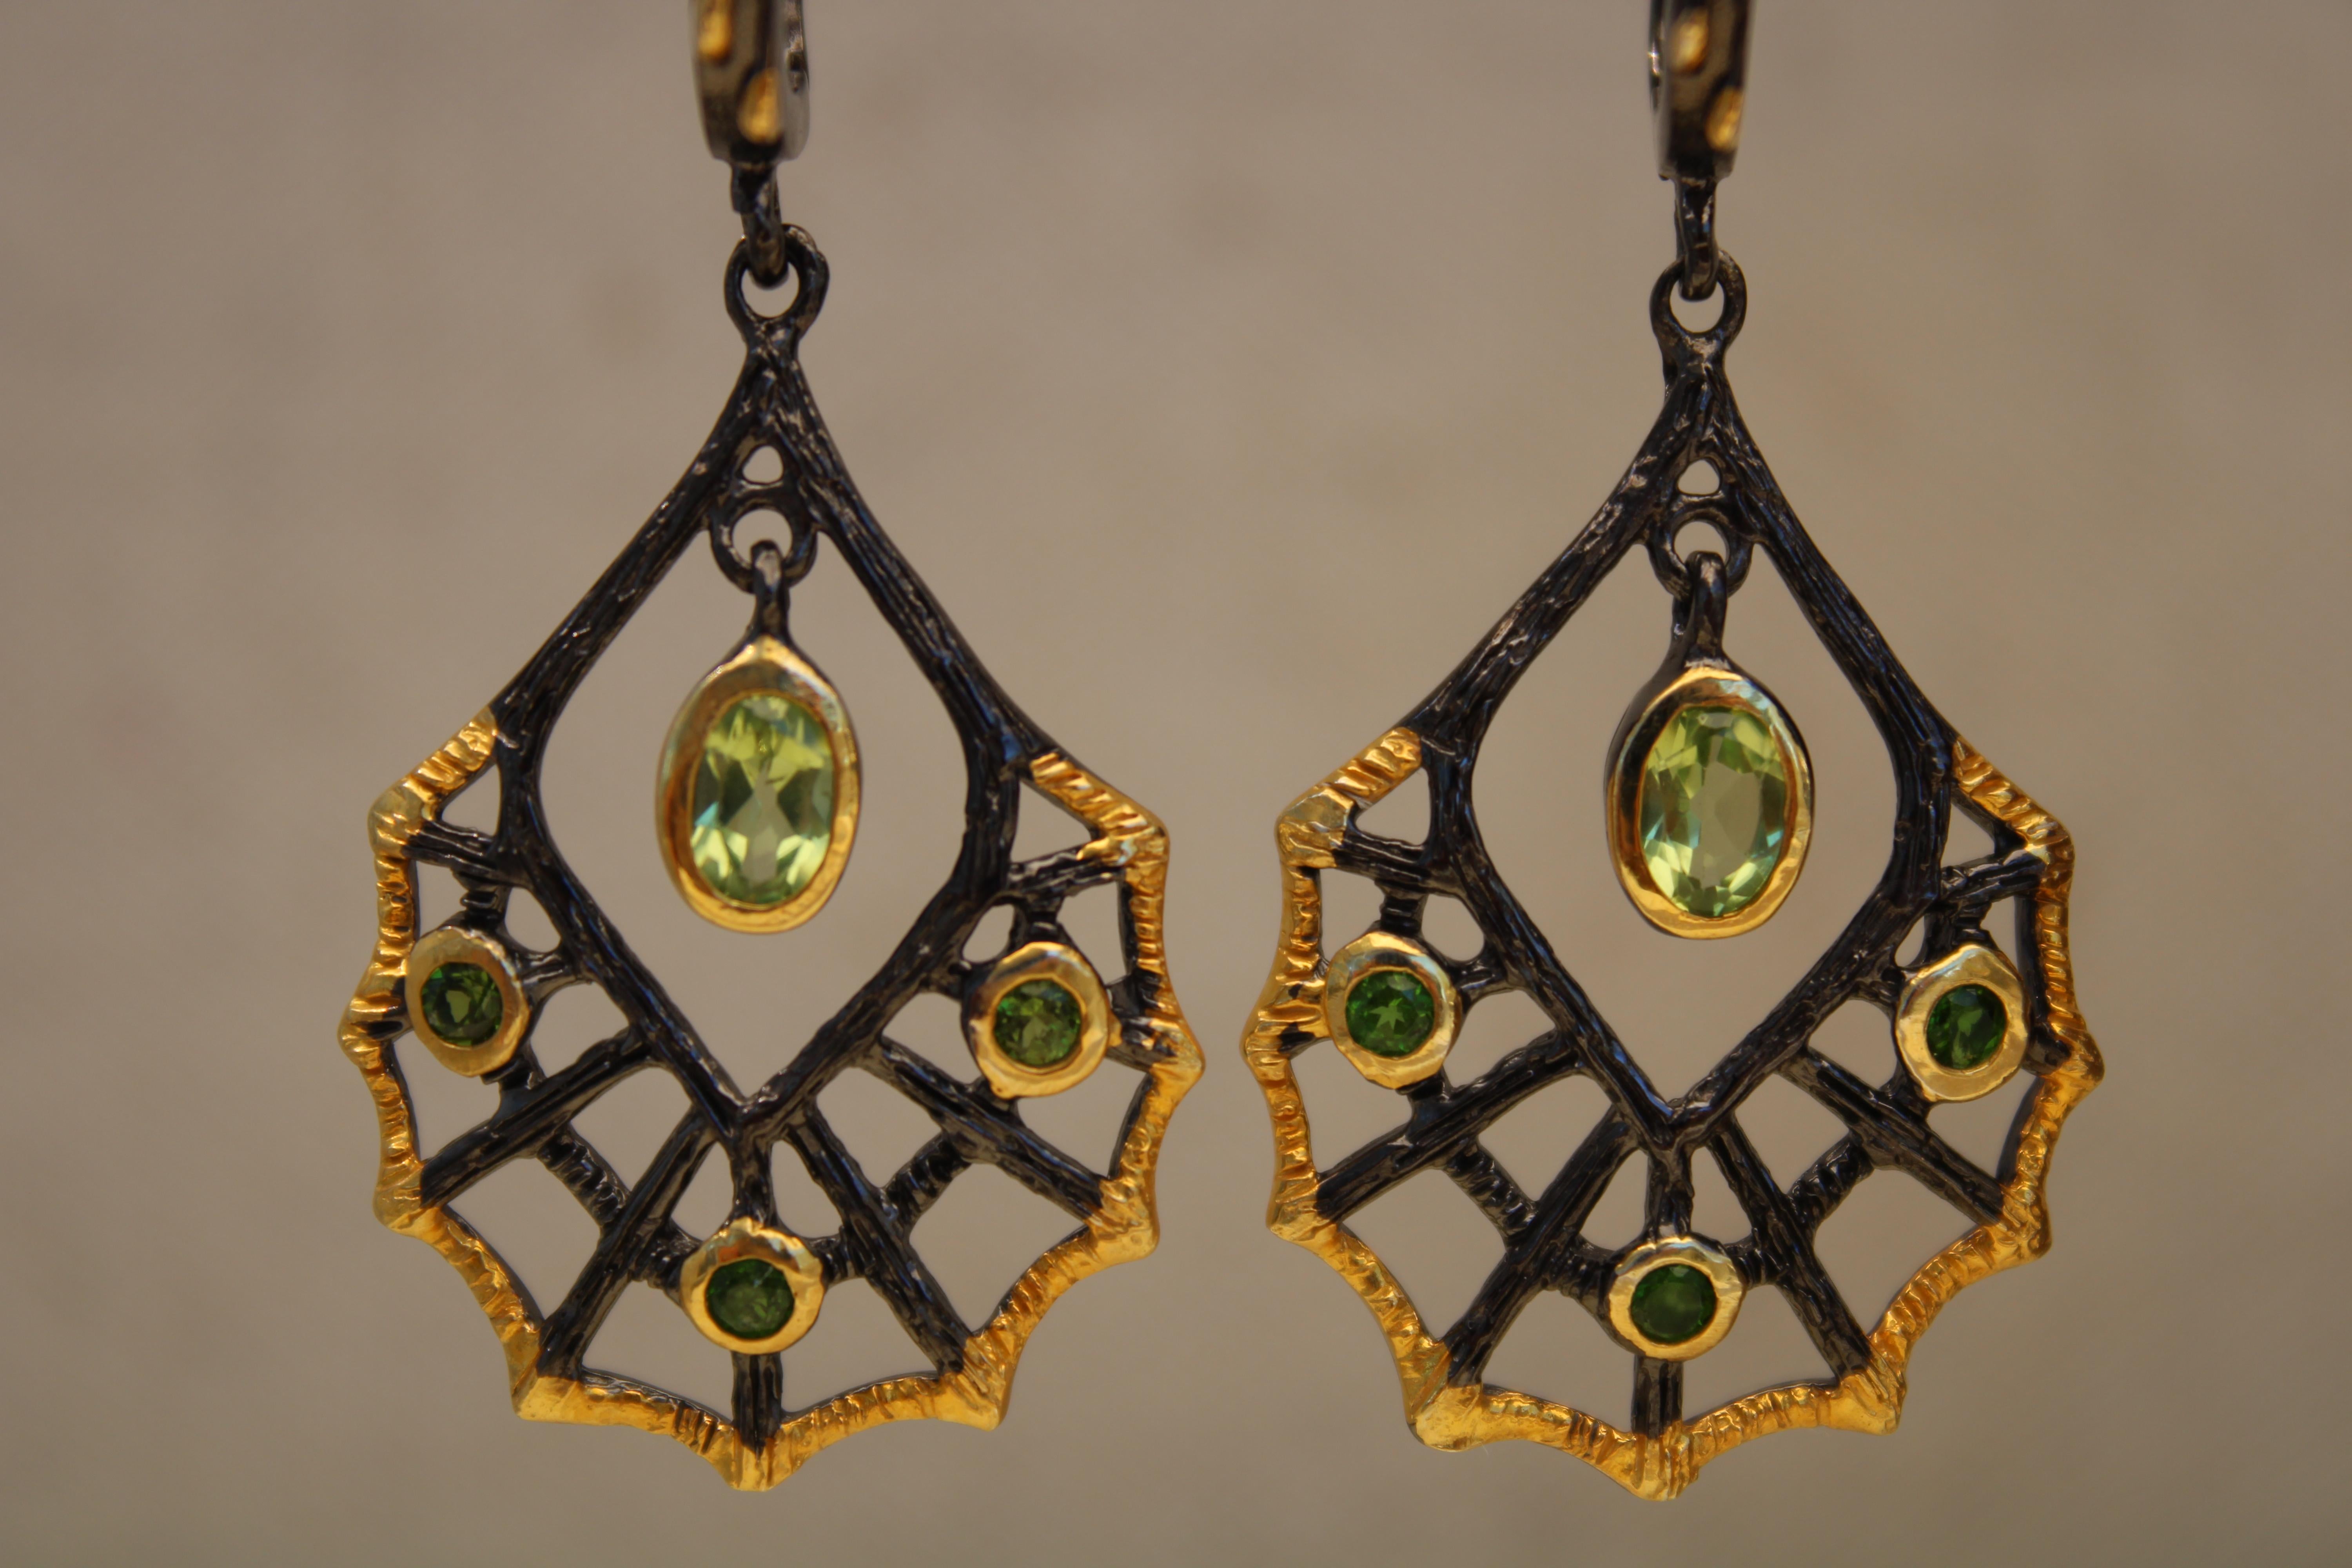 Pair of 14k gold plated and black rhodium dangle earrings set with 1 green peridot oval and 3 round green peridot stones on each side. These earrings feature a web design cast in black rhodium and gold plating over sterling silver. The oval peridot